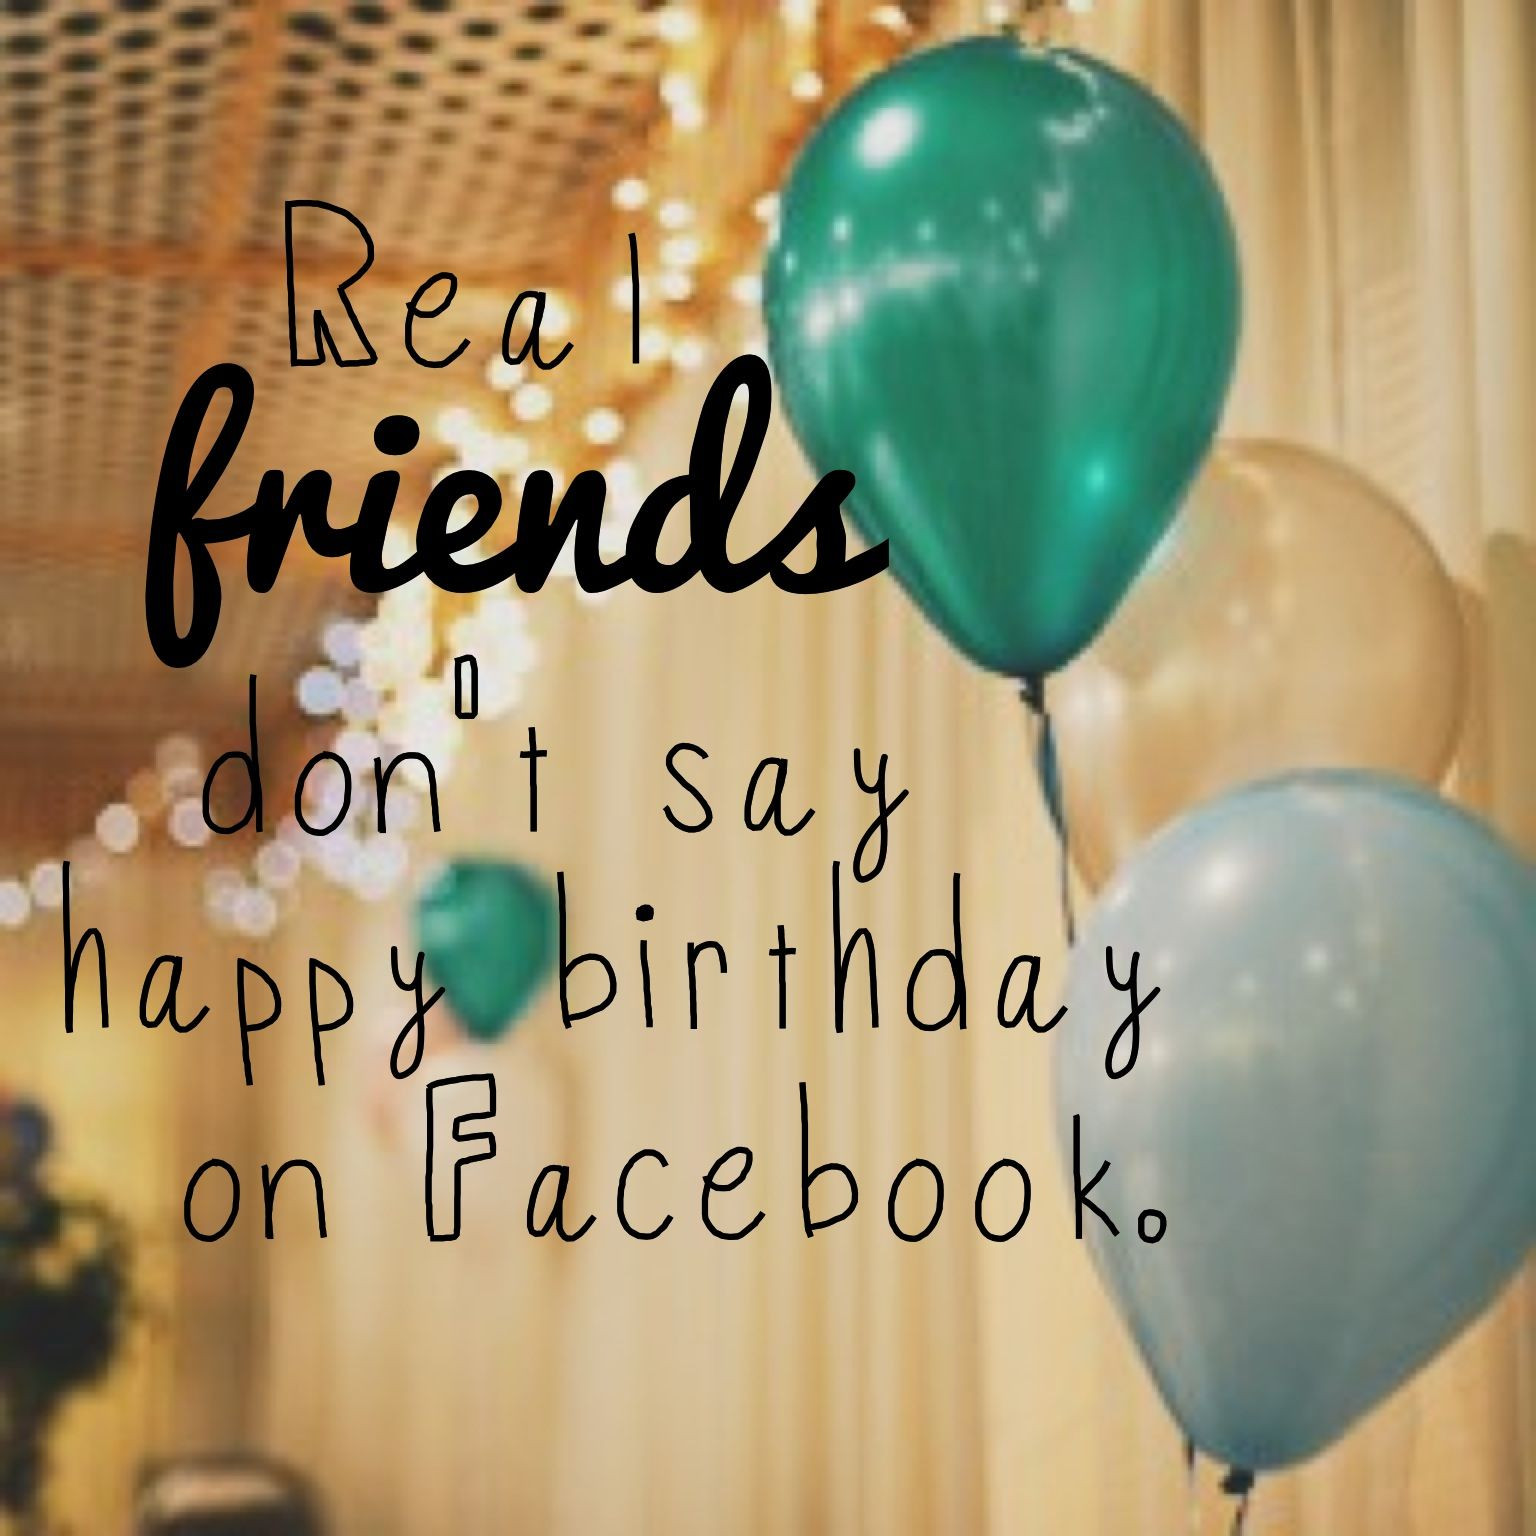 Funny Birthday Wishes For Friends On Facebook
 Real friends don t say happy birthday on